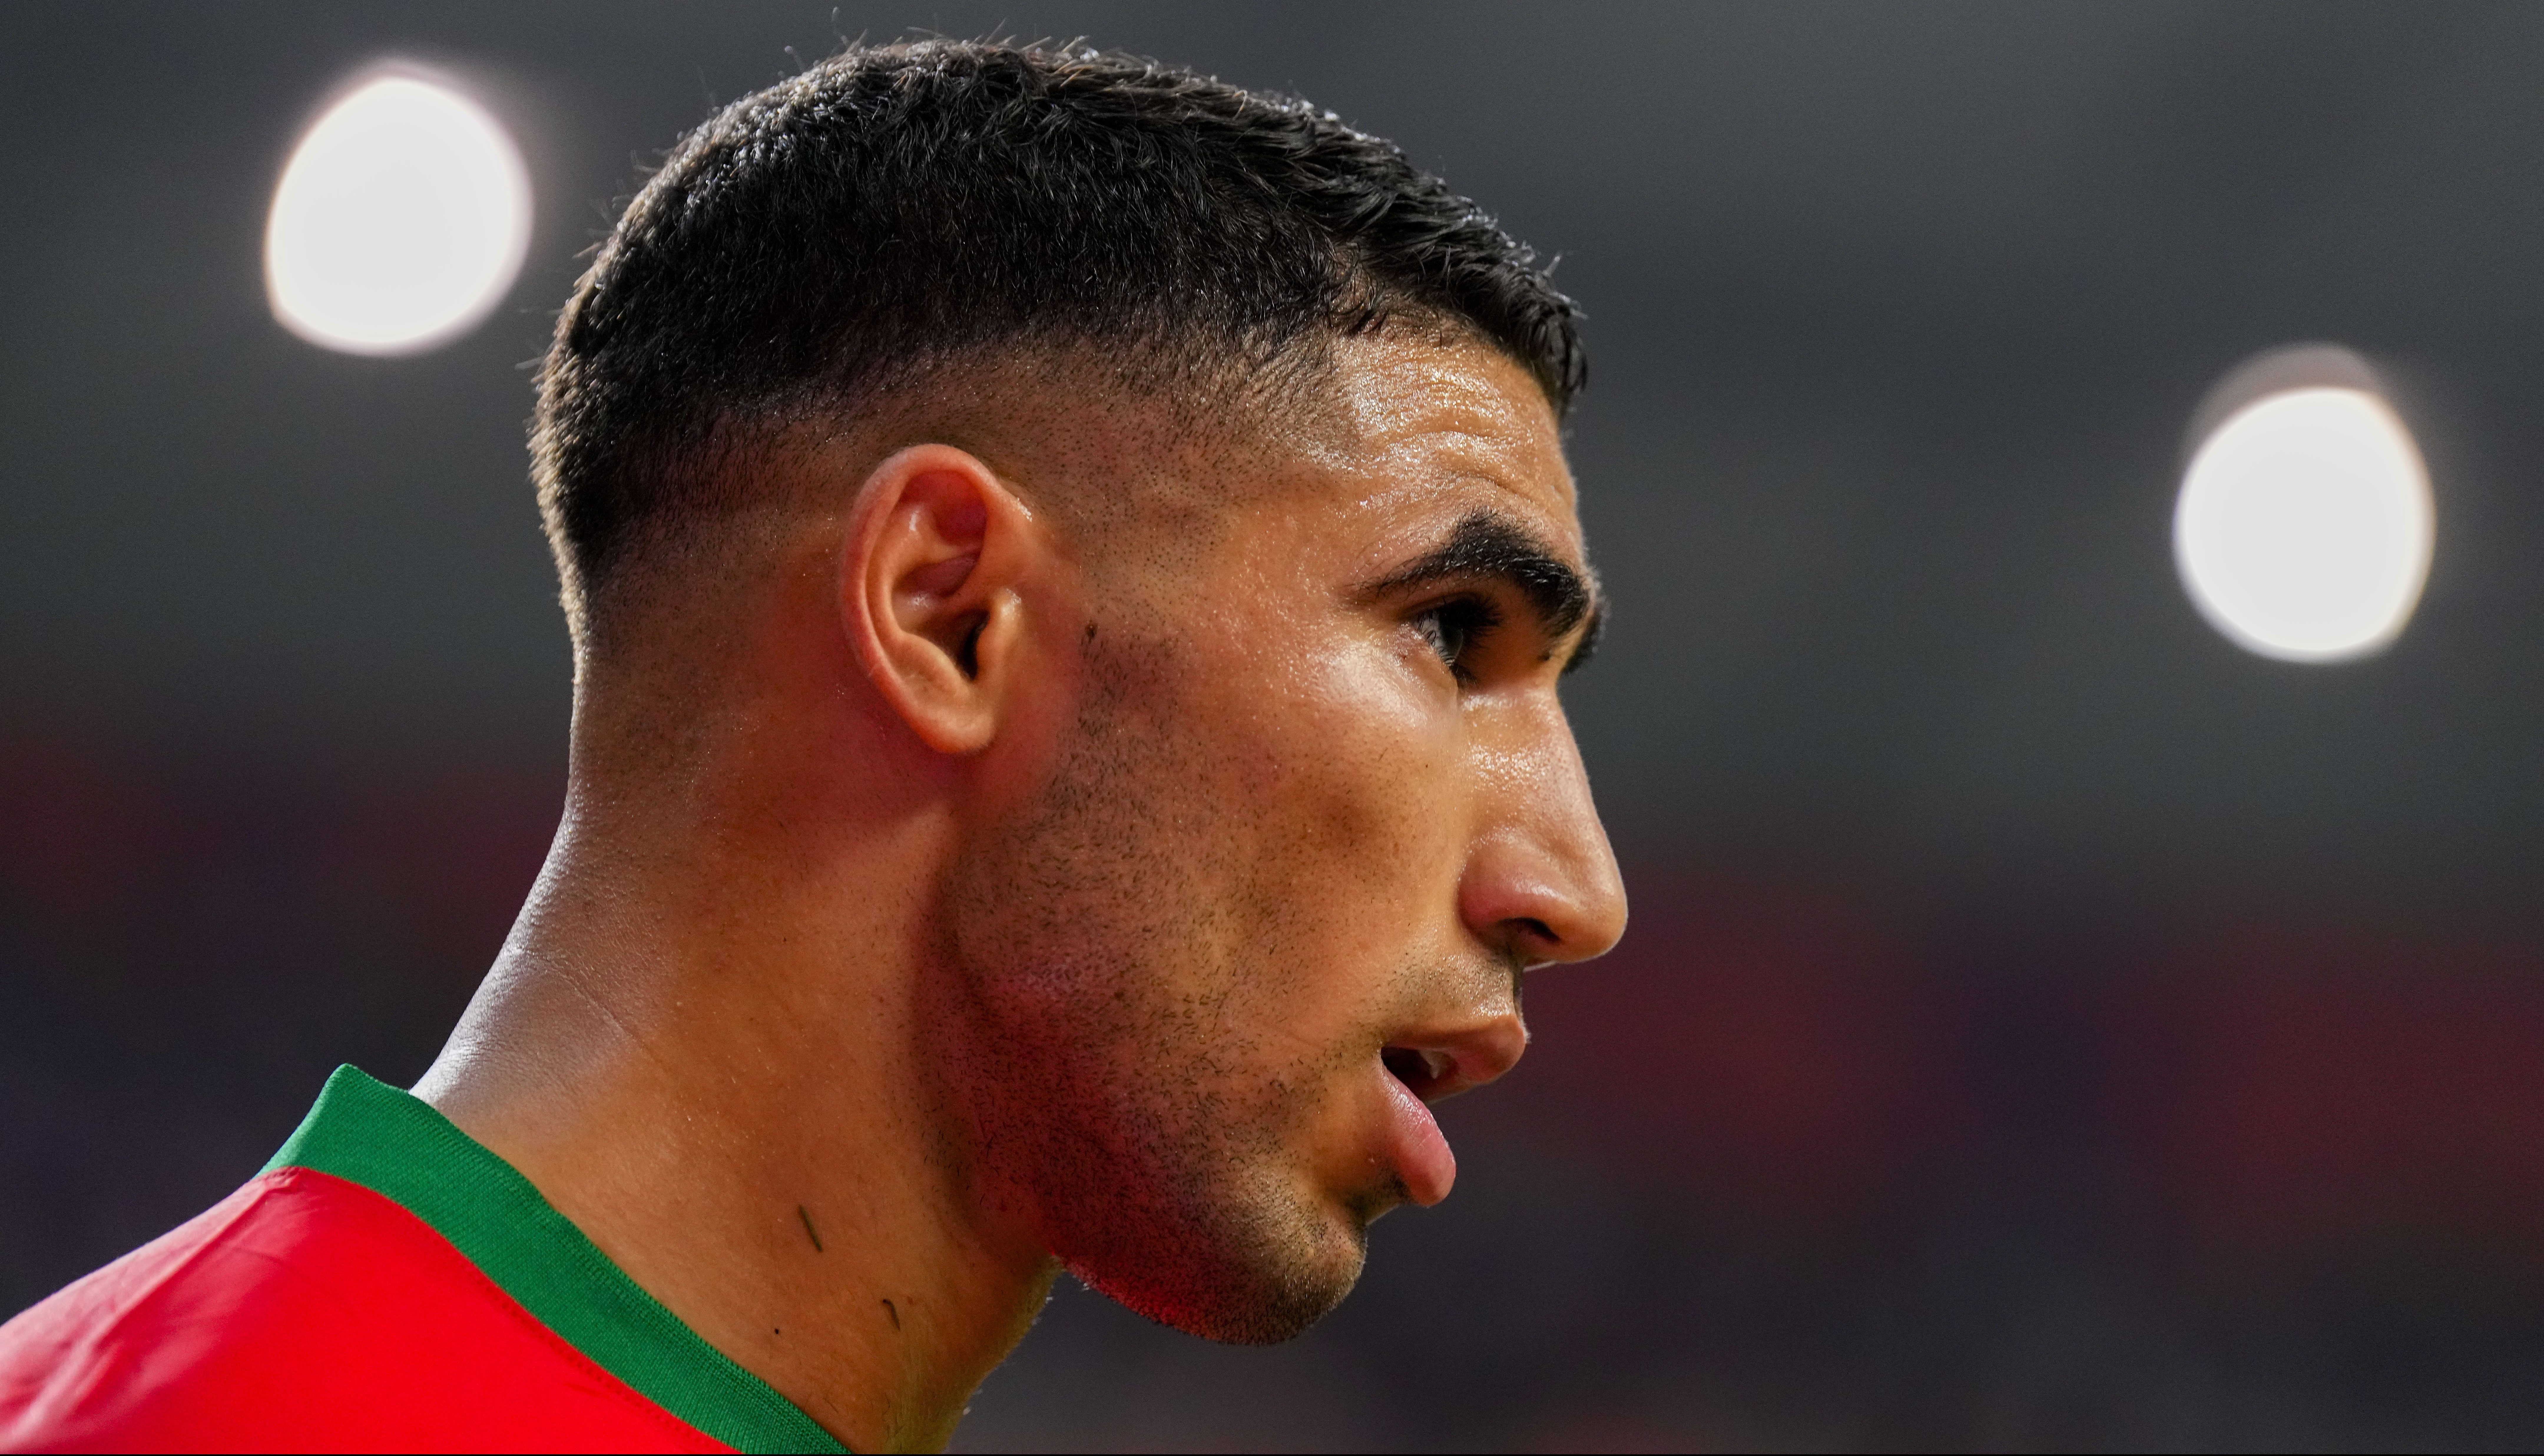 PSG and Morocco star Achraf Hakimi investigated for rape